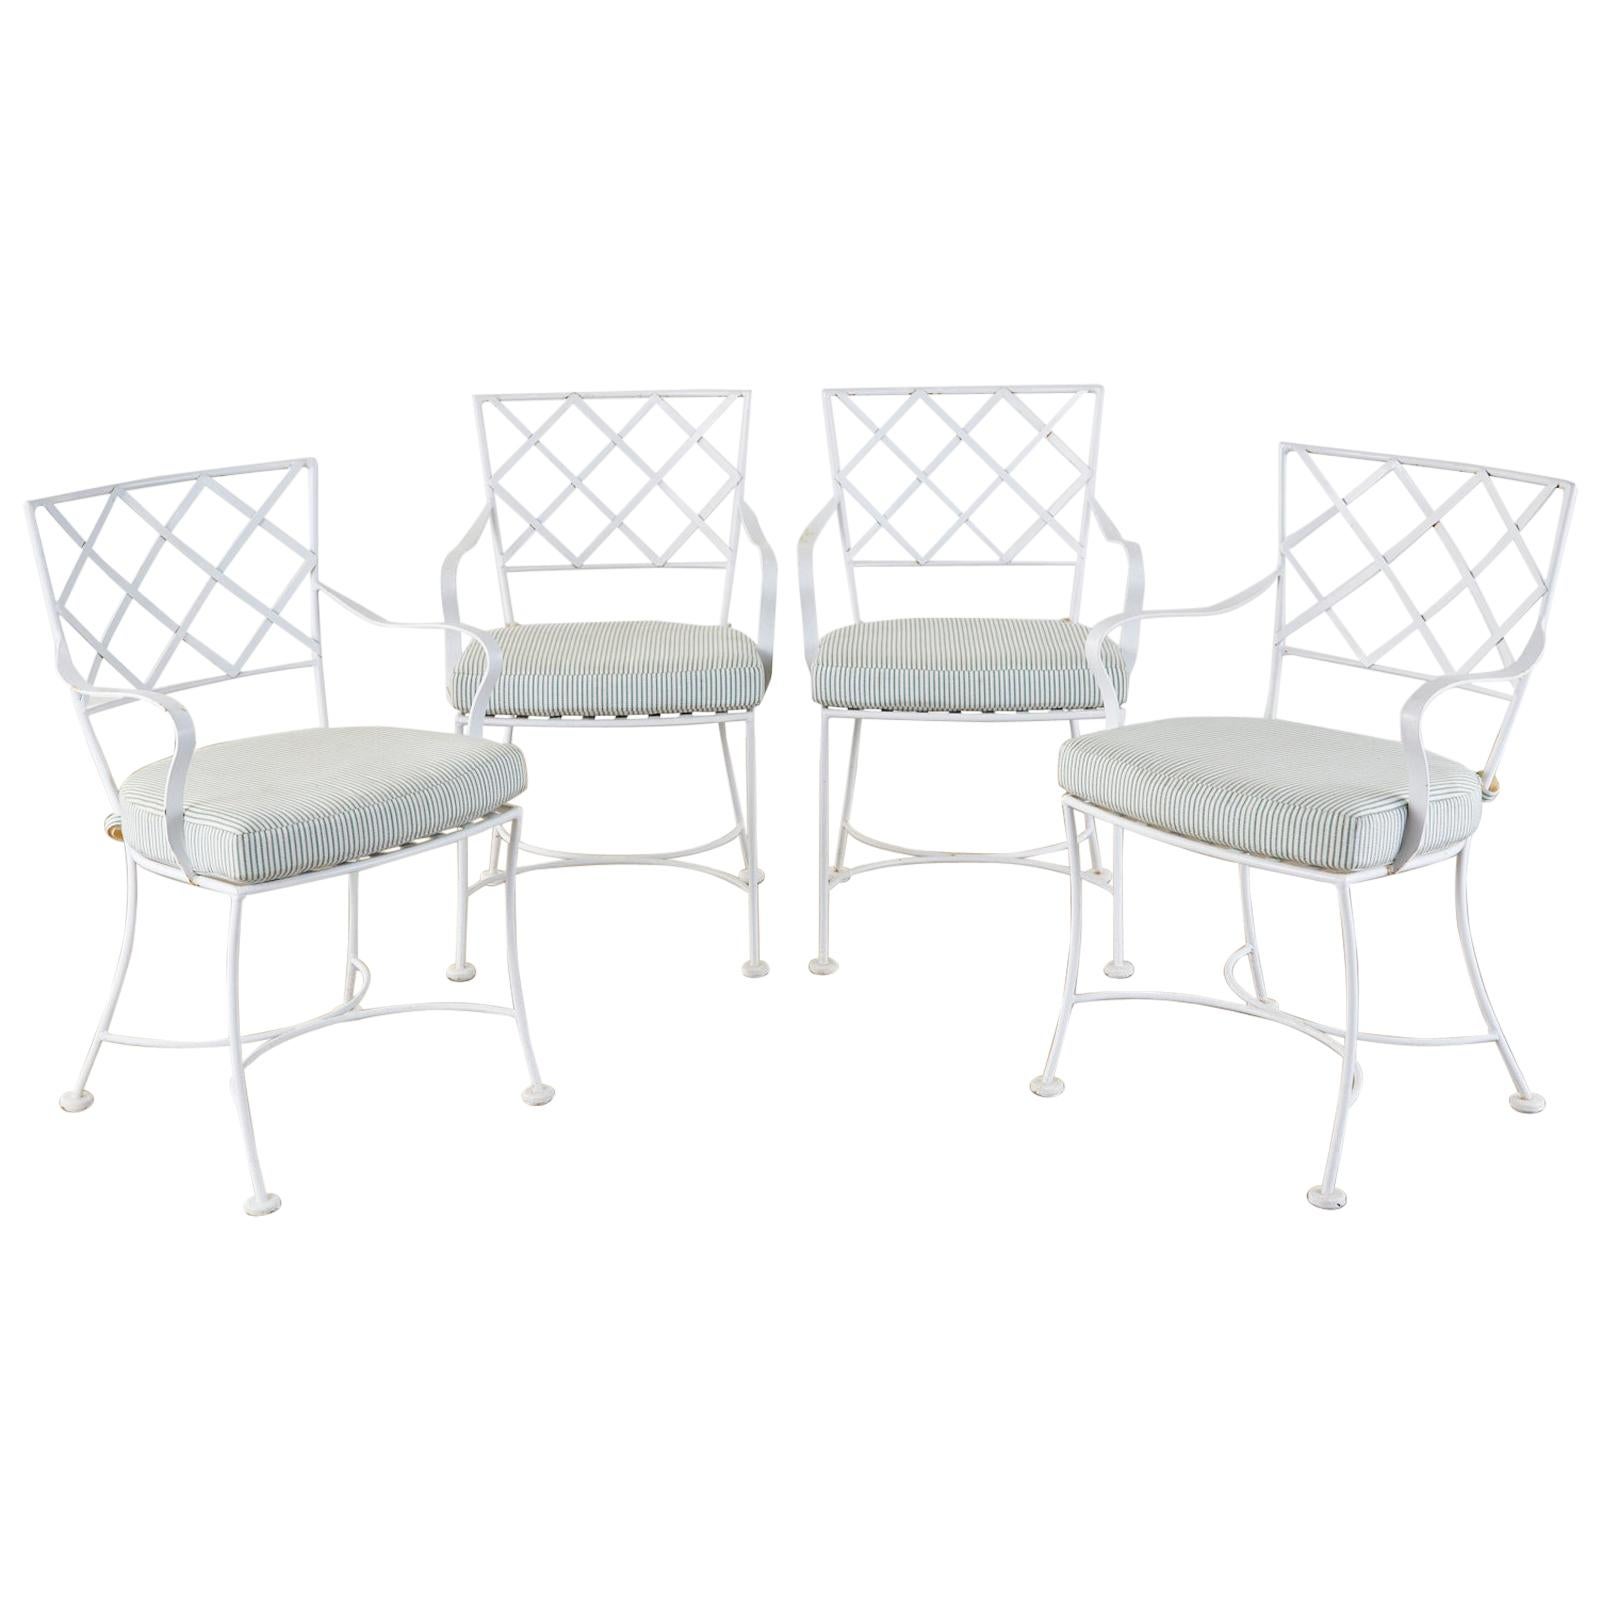 Set of Four Neoclassical Style Iron Garden Dining Chairs